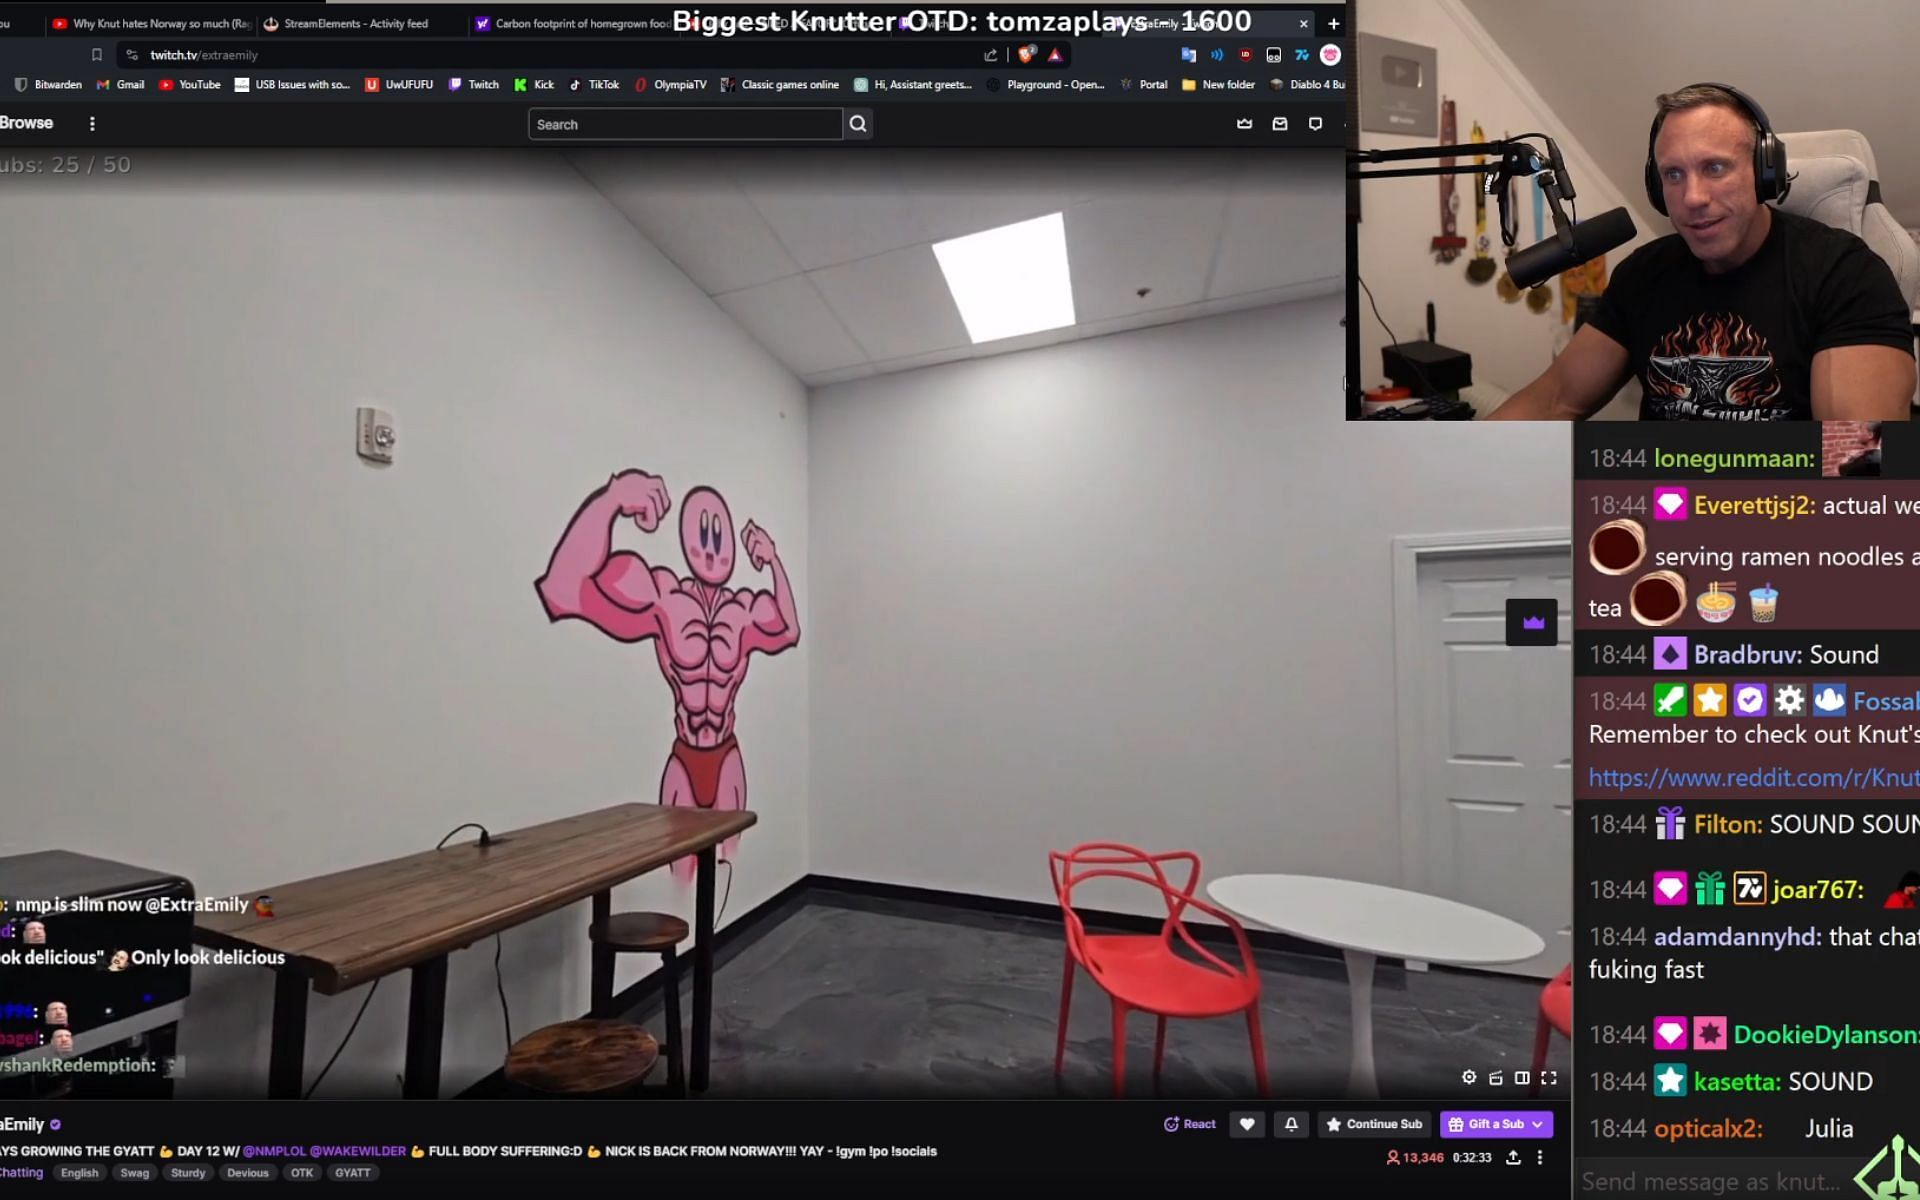 Community reacts to the artwork inside Knut and Mizkif